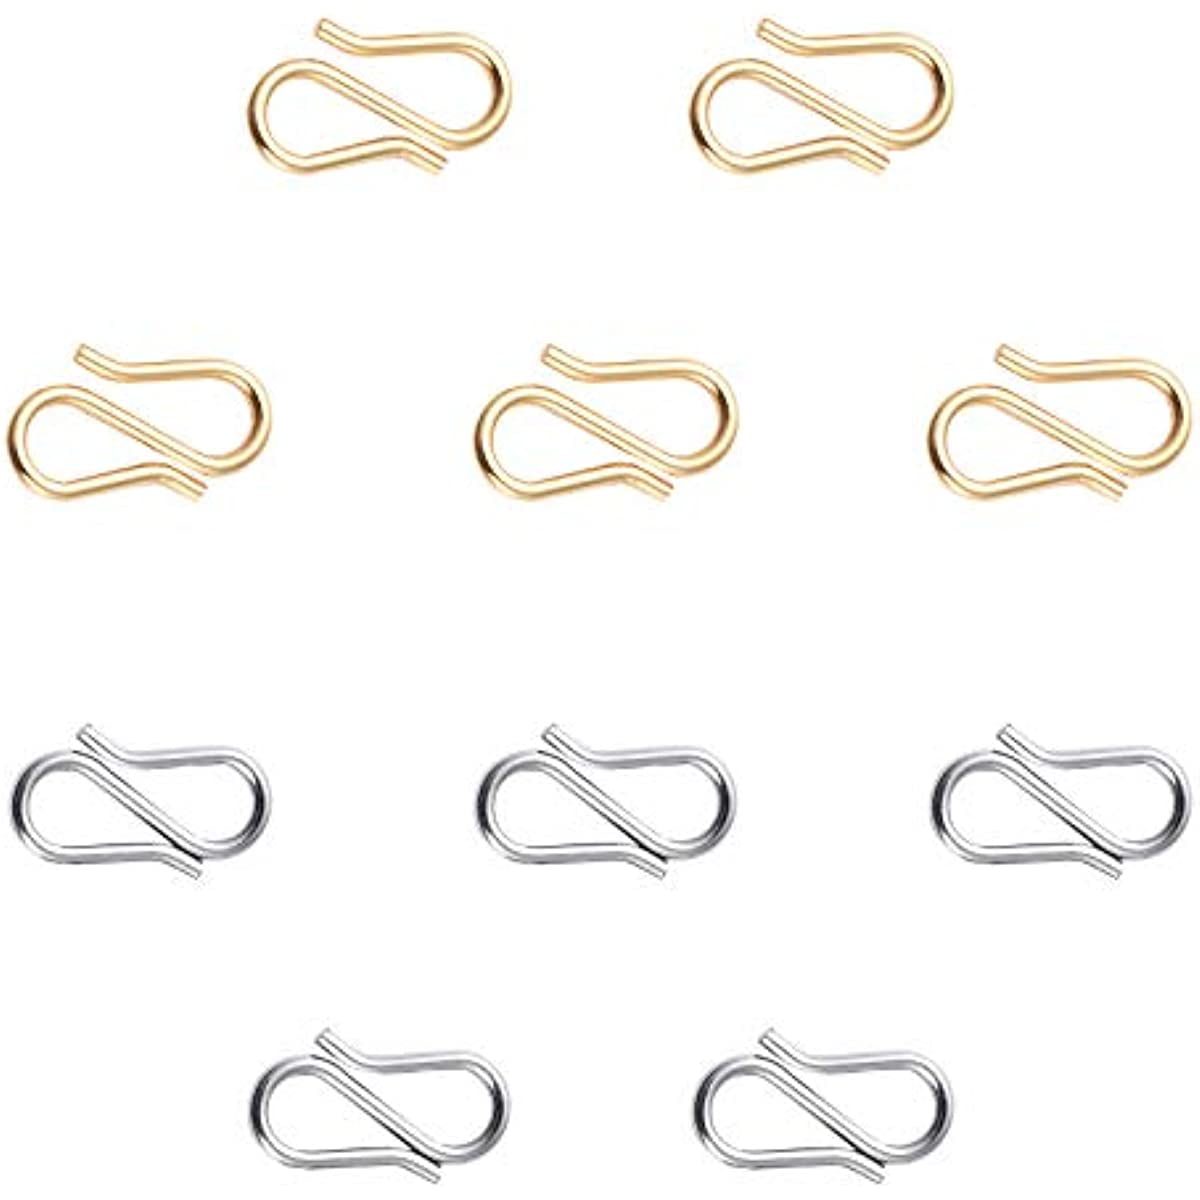 60pcs 2 Colors S-Hook Necklace Clasp 304 Stainless Steel Chain Clasps Metal S Hooks Clasps Connectors S-Shaped Hook for Necklace Bracelet Jewelry